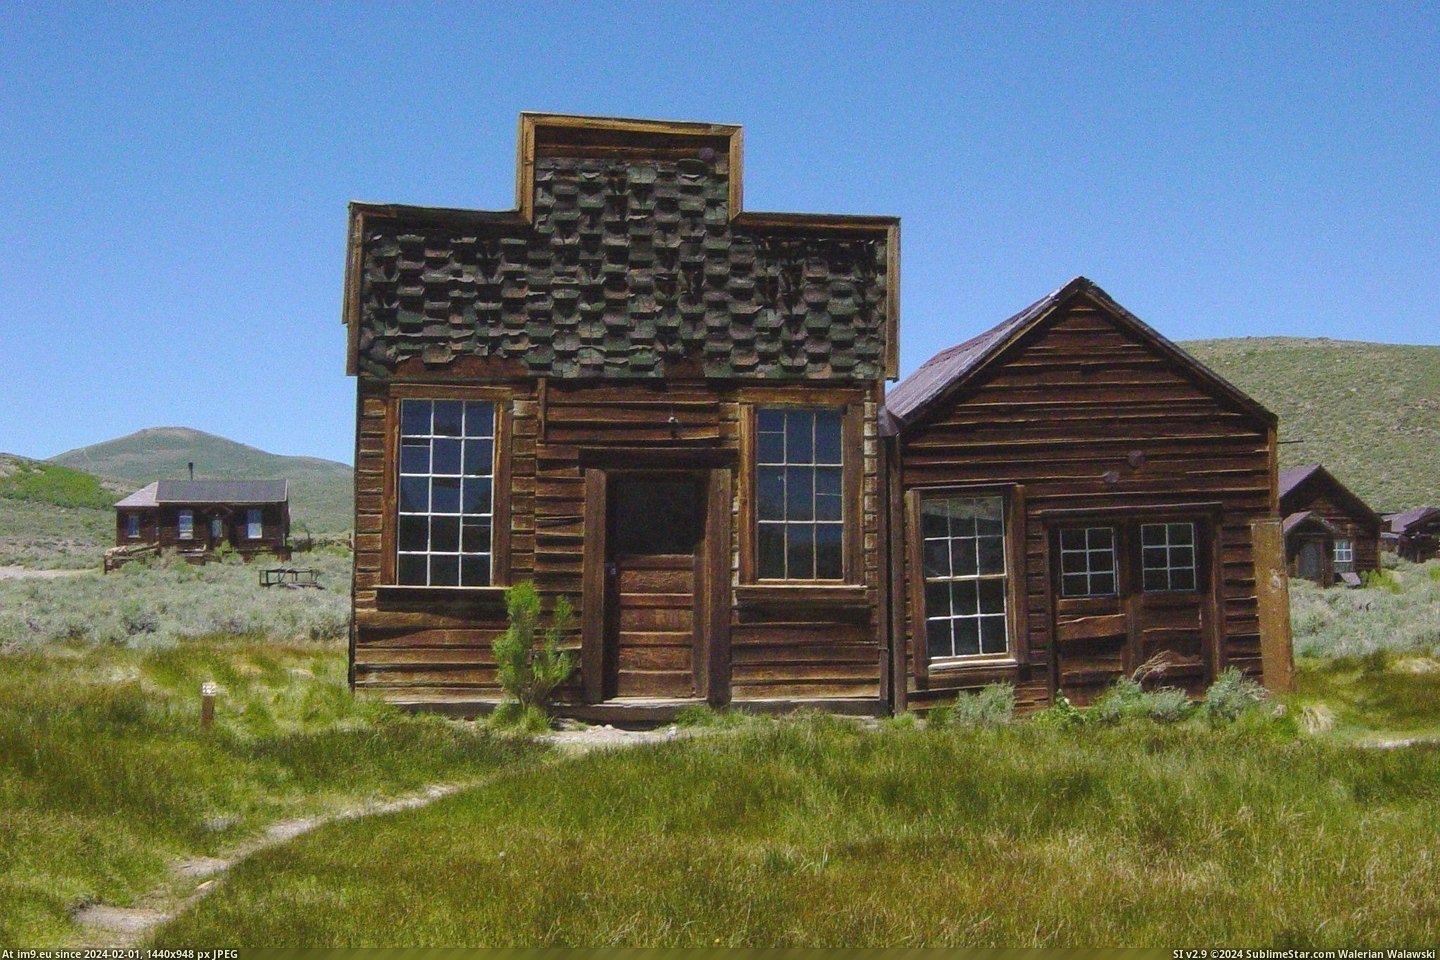 Sam Leon Bar And Barber Shop In Bodie, California (in Bodie - a ghost town in Eastern California)